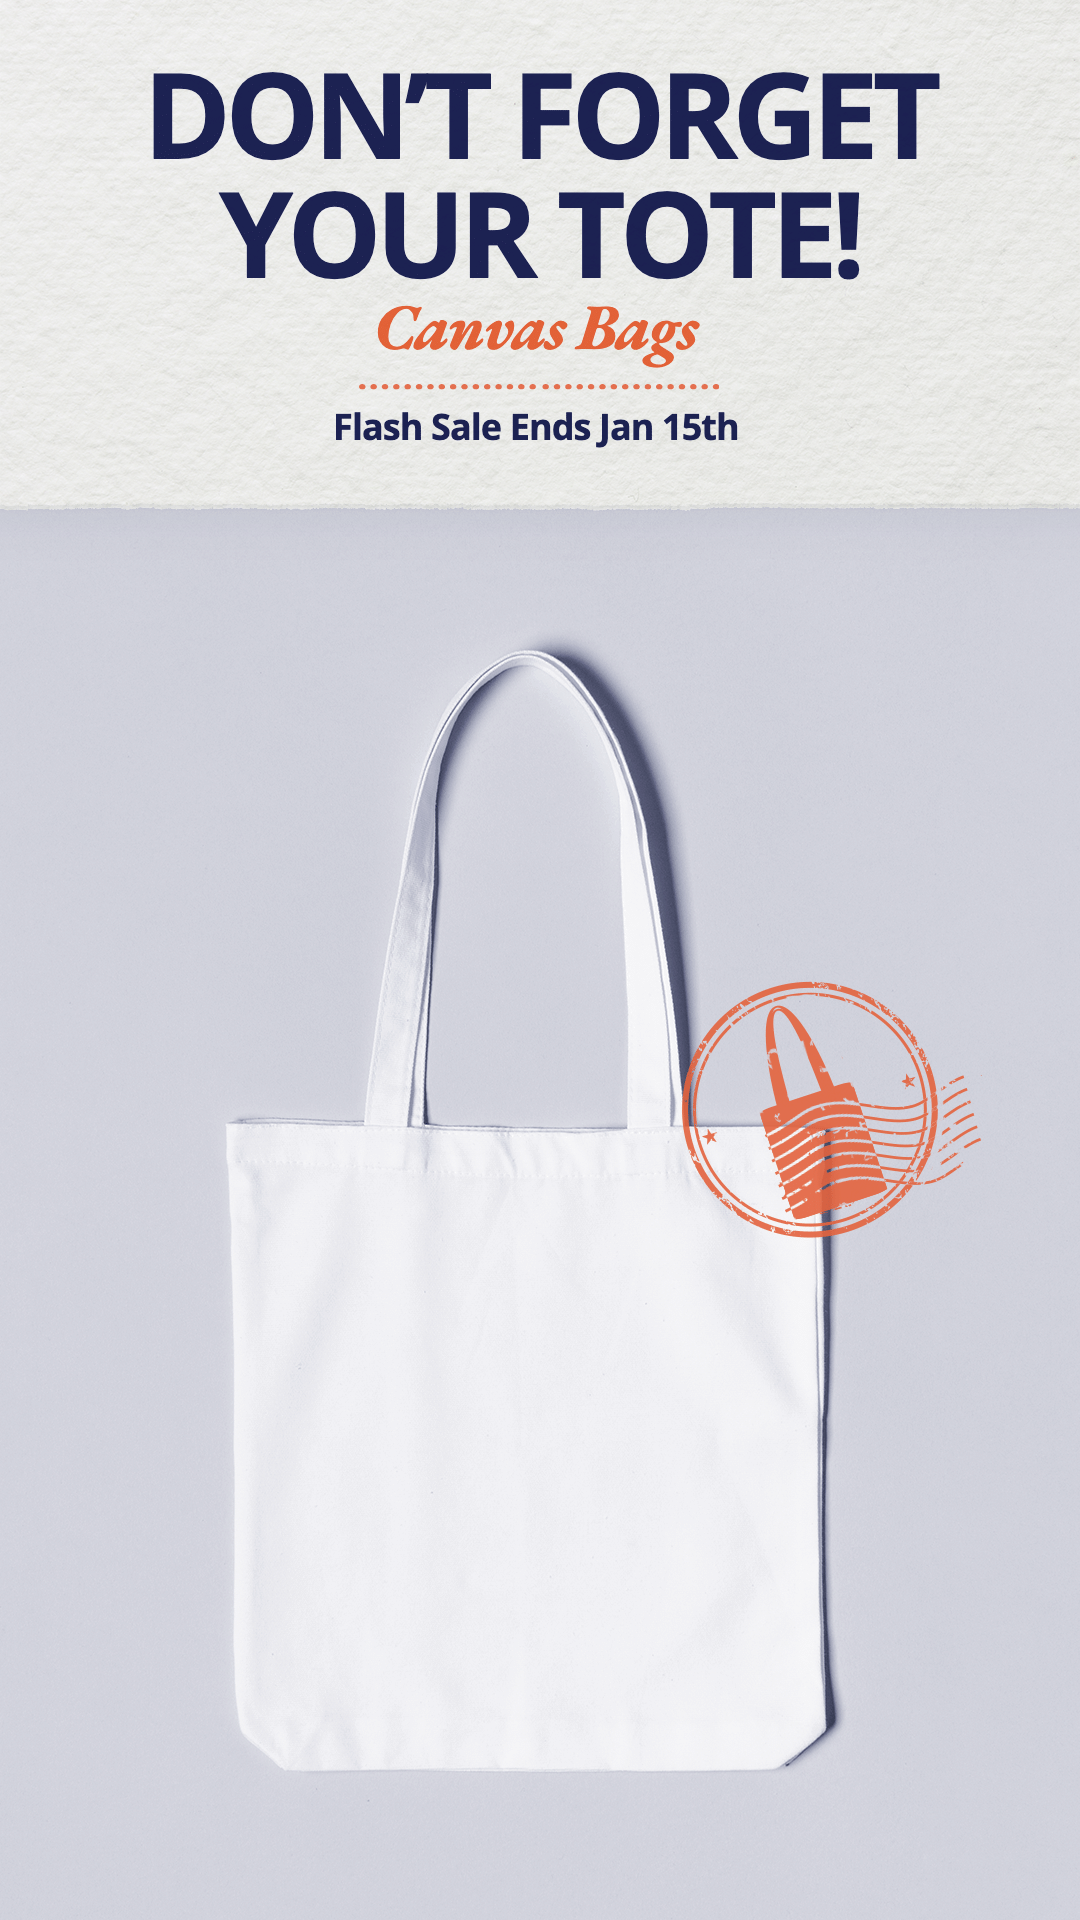 Canvas Tote Regular Promotion Ecommerce Story预览效果